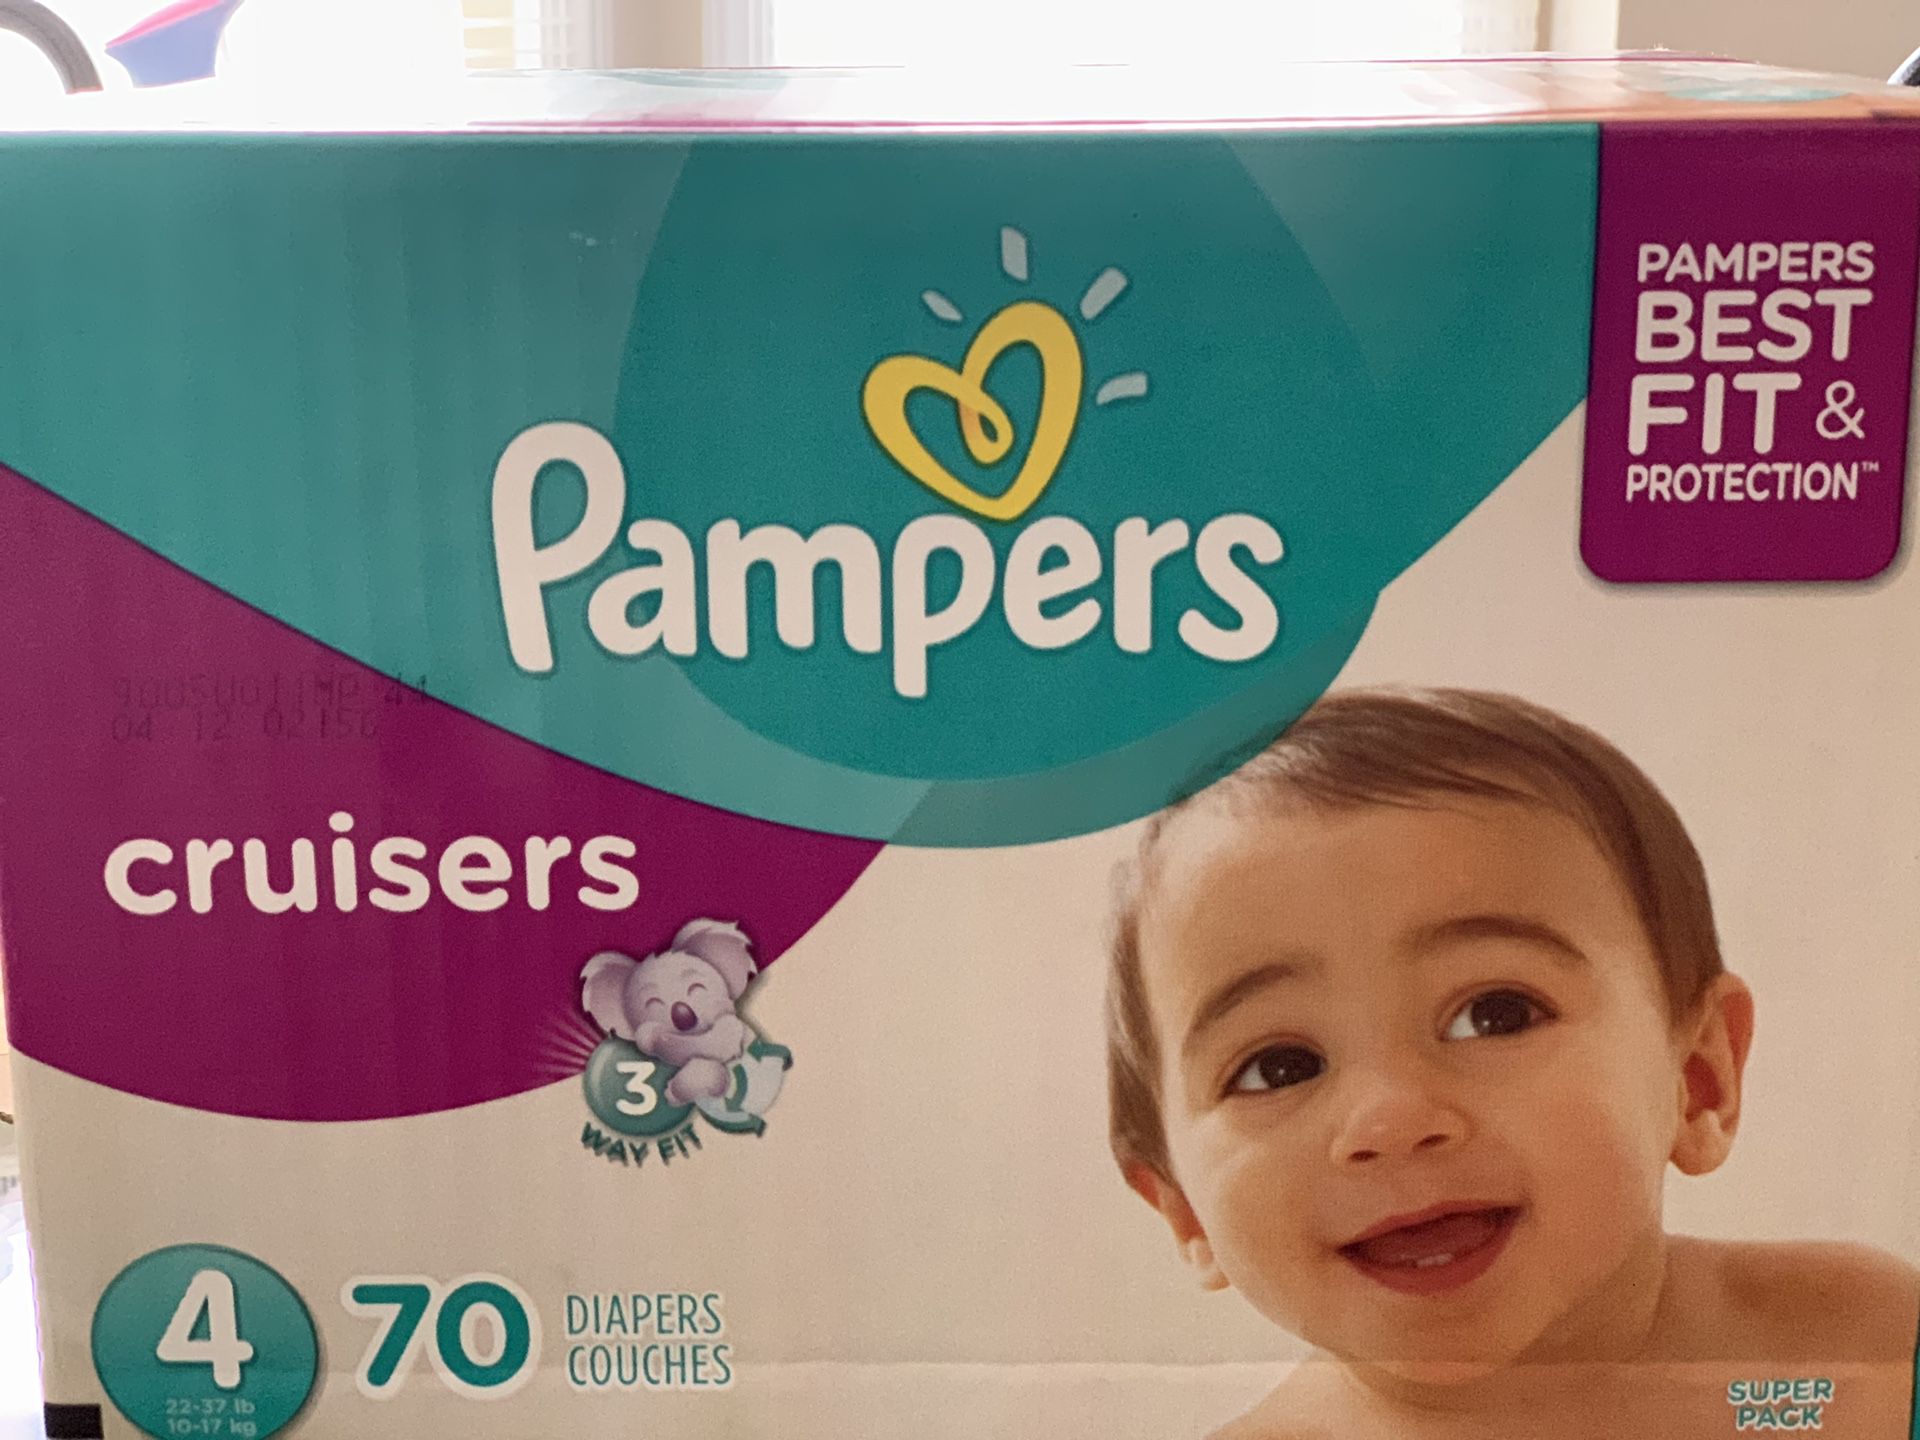 70 Size 4 Pampers Disposable Diapers